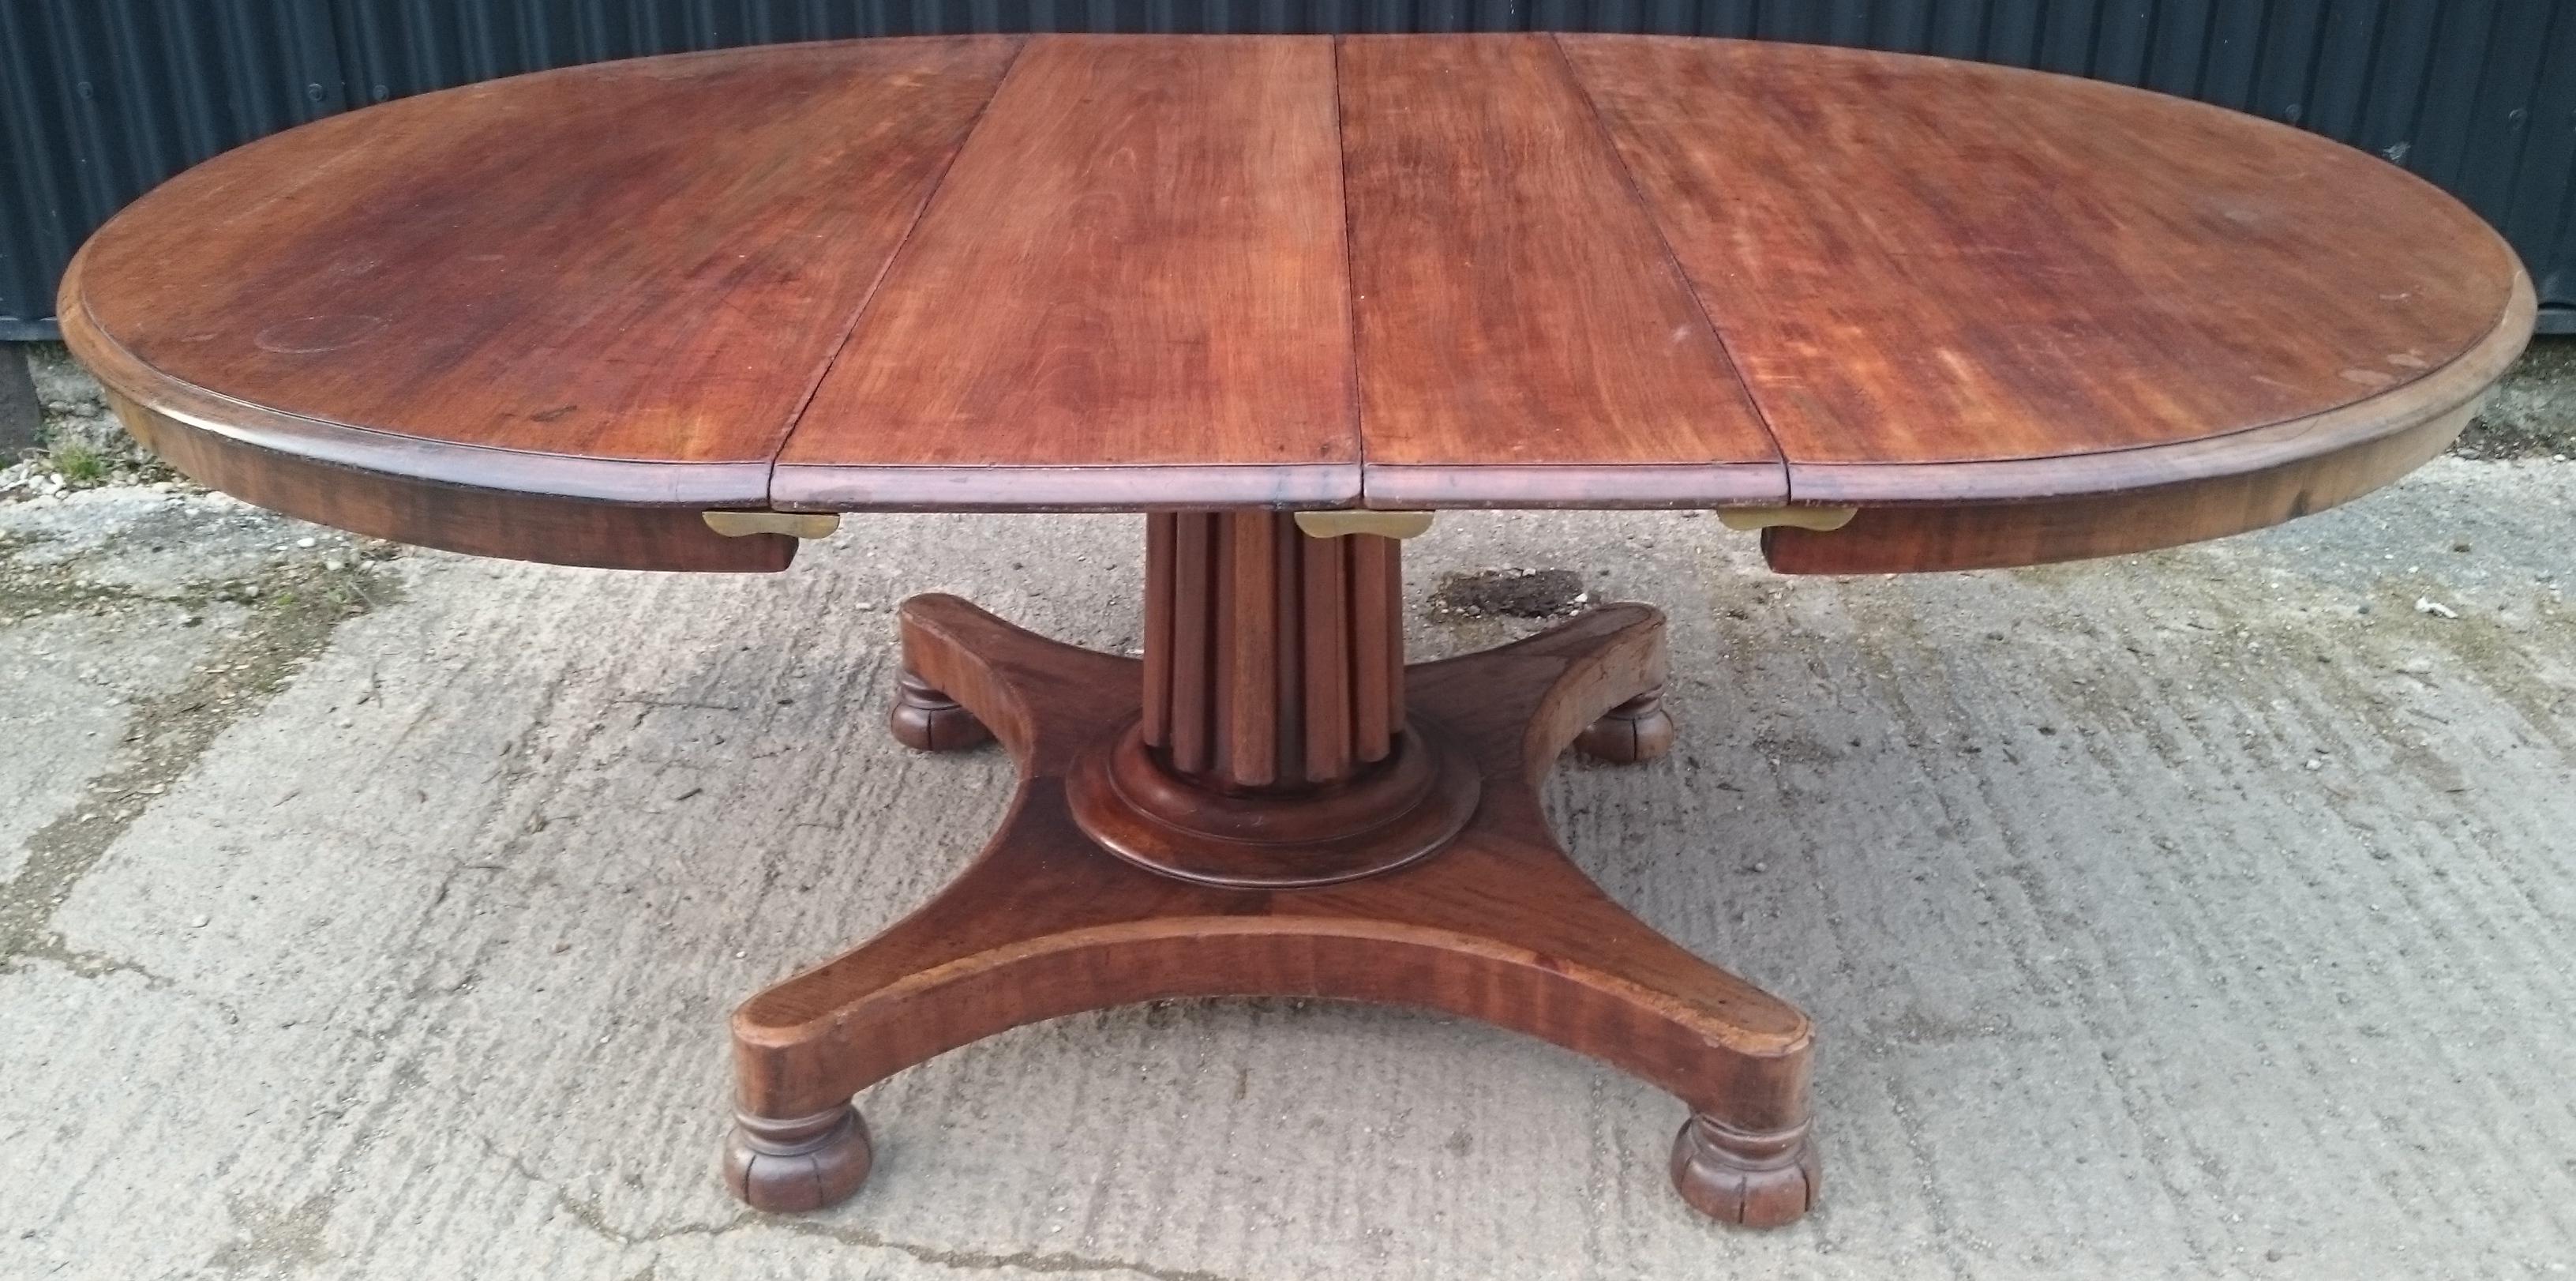 British 19th Century Mahogany Antique Extending Breakfast Dining Table For Sale